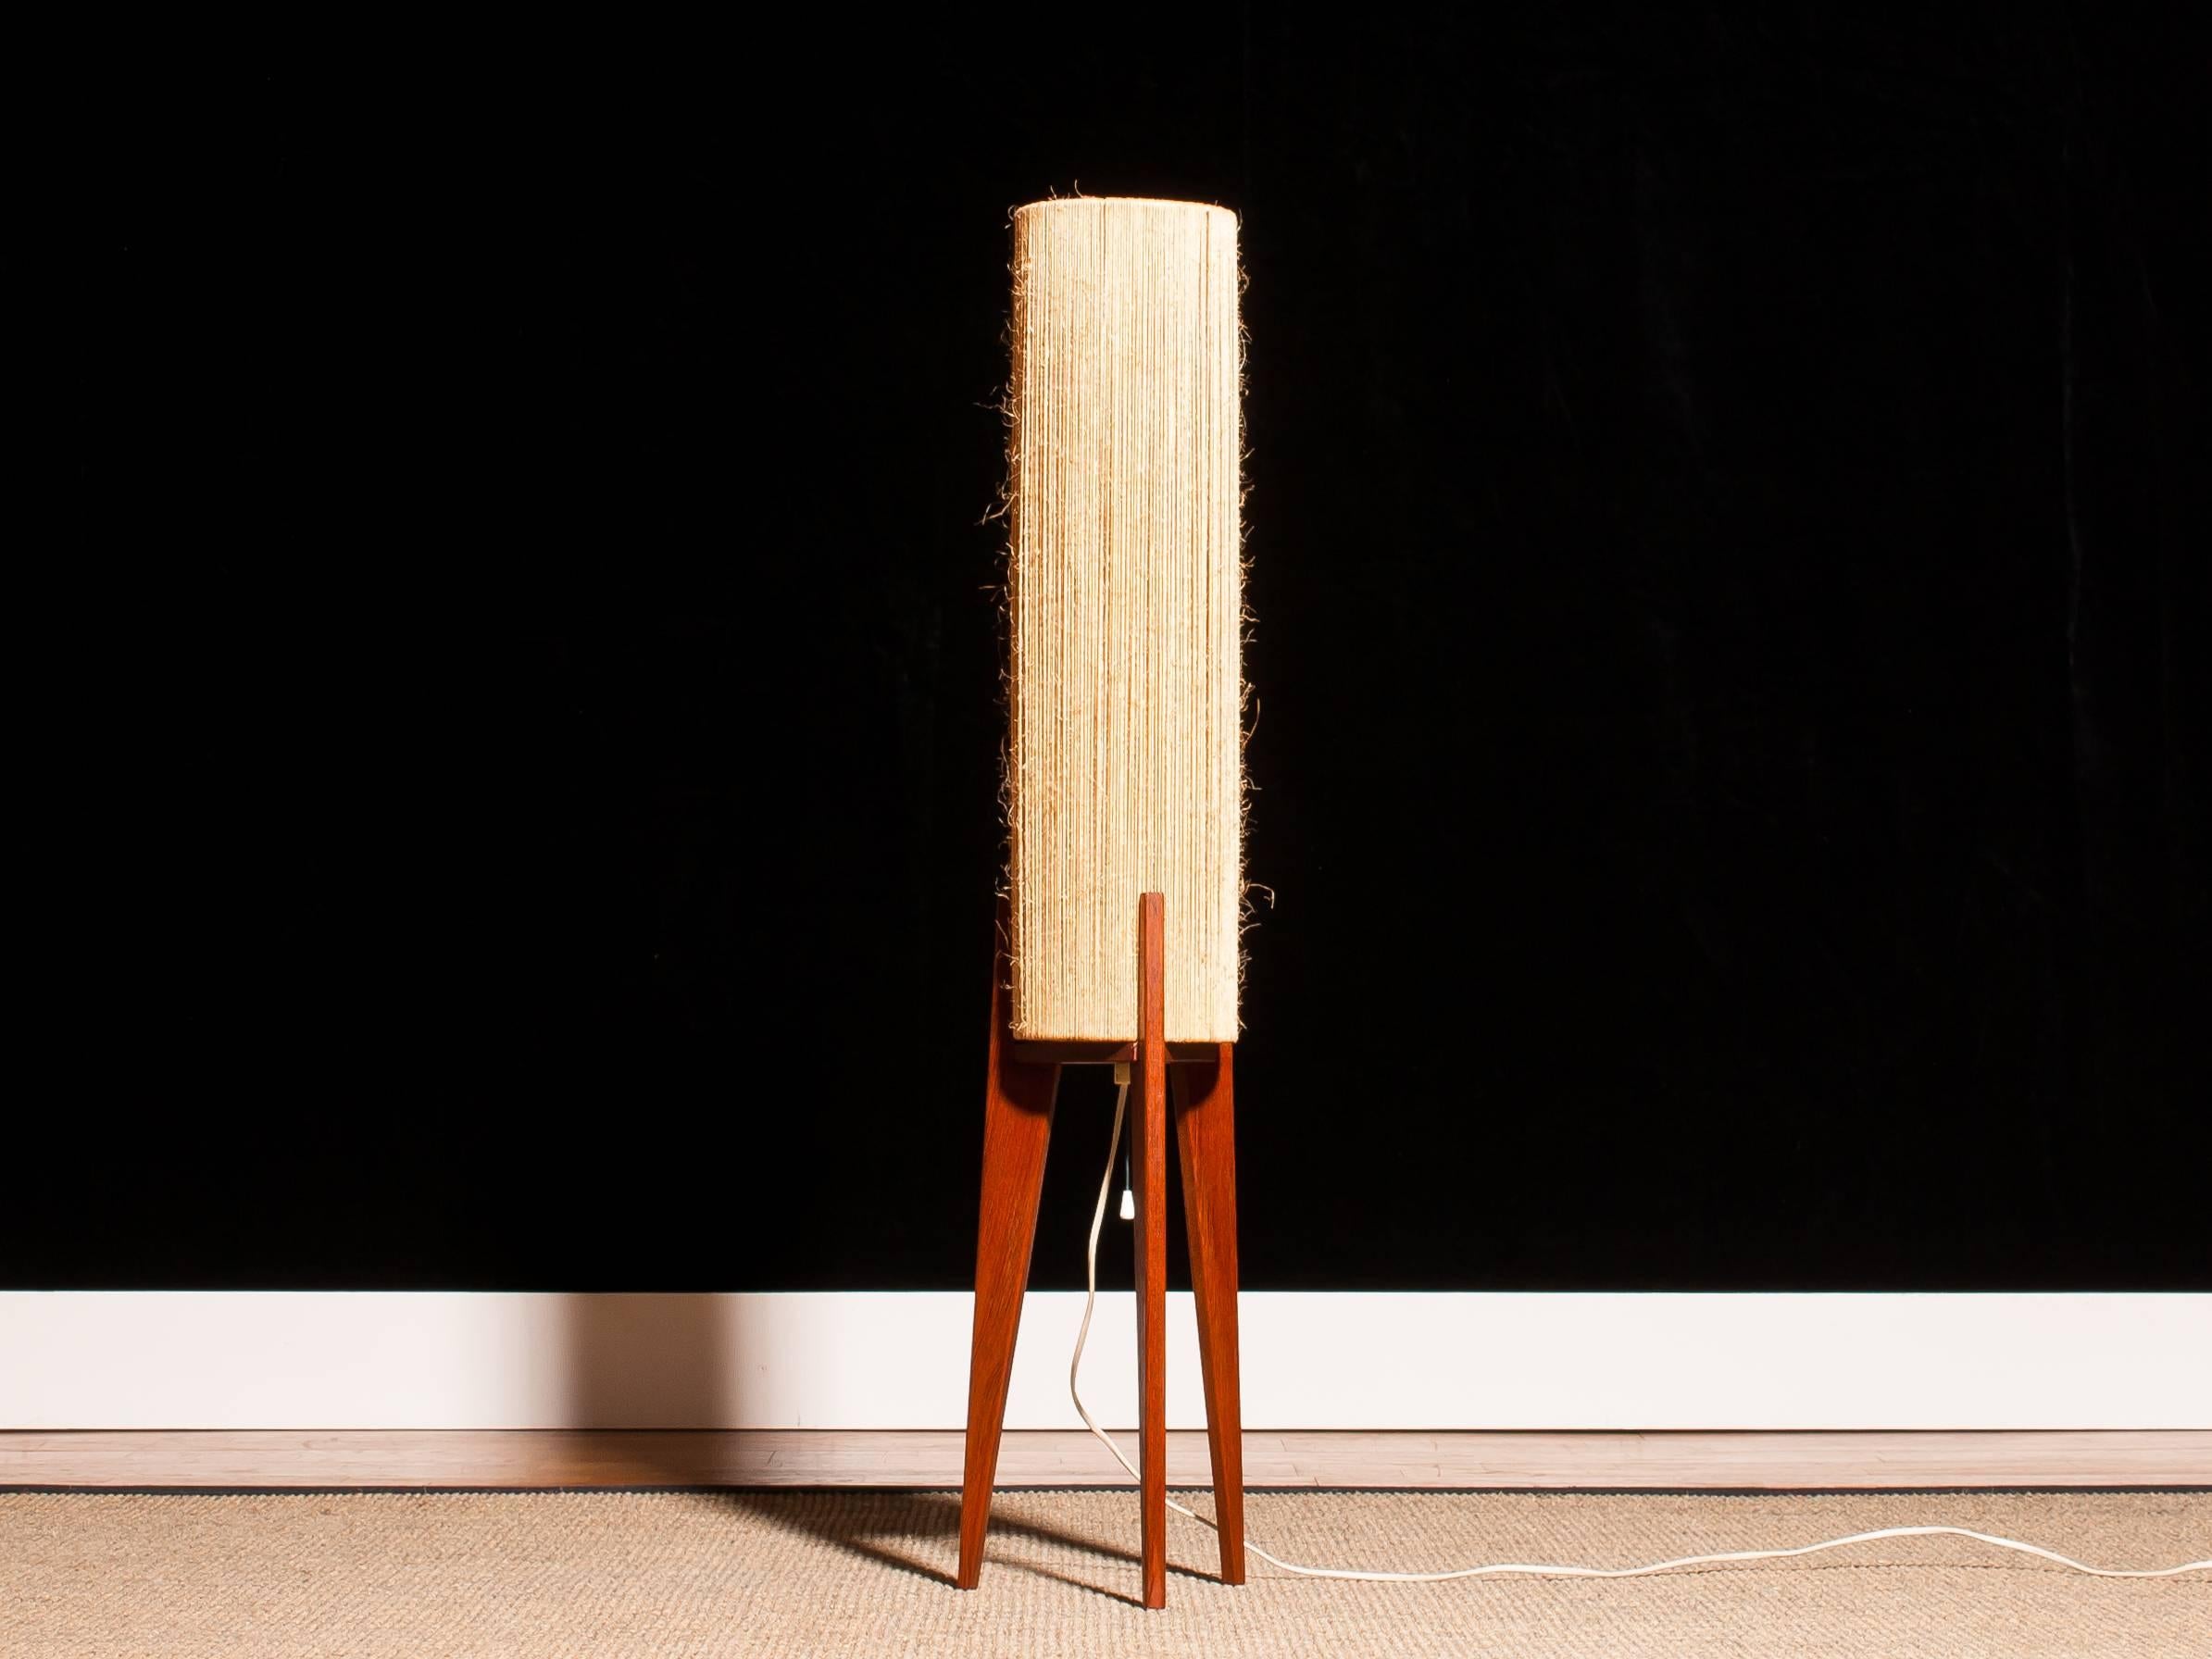 Wonderful floor lamp made by Fog & Mørup, Denmark.
This lamp has a shade made of rope on a teak stand.
It is in a beautiful condition.
There are two available.
Period 1960s
Dimensions: H 100 cm, ø 22 cm.